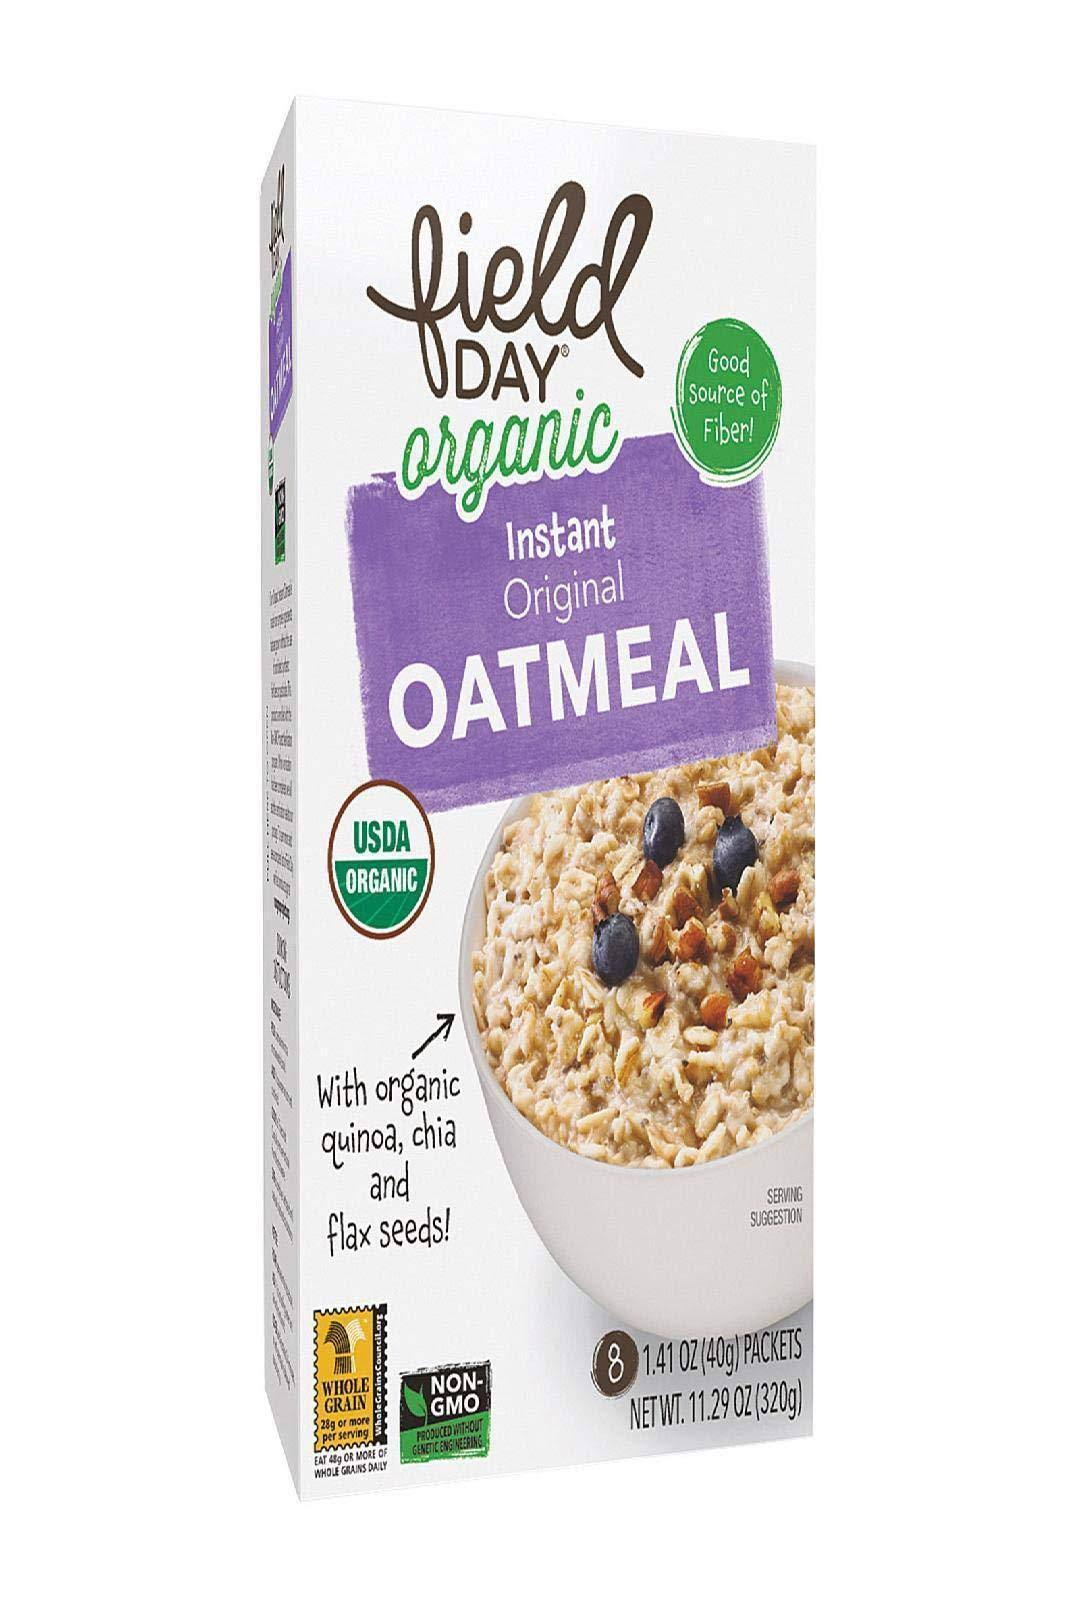 Field Day Organic Instant Original Oatmeal - Oatmeal - Case of 6 - 11.29 oz. - Default Title